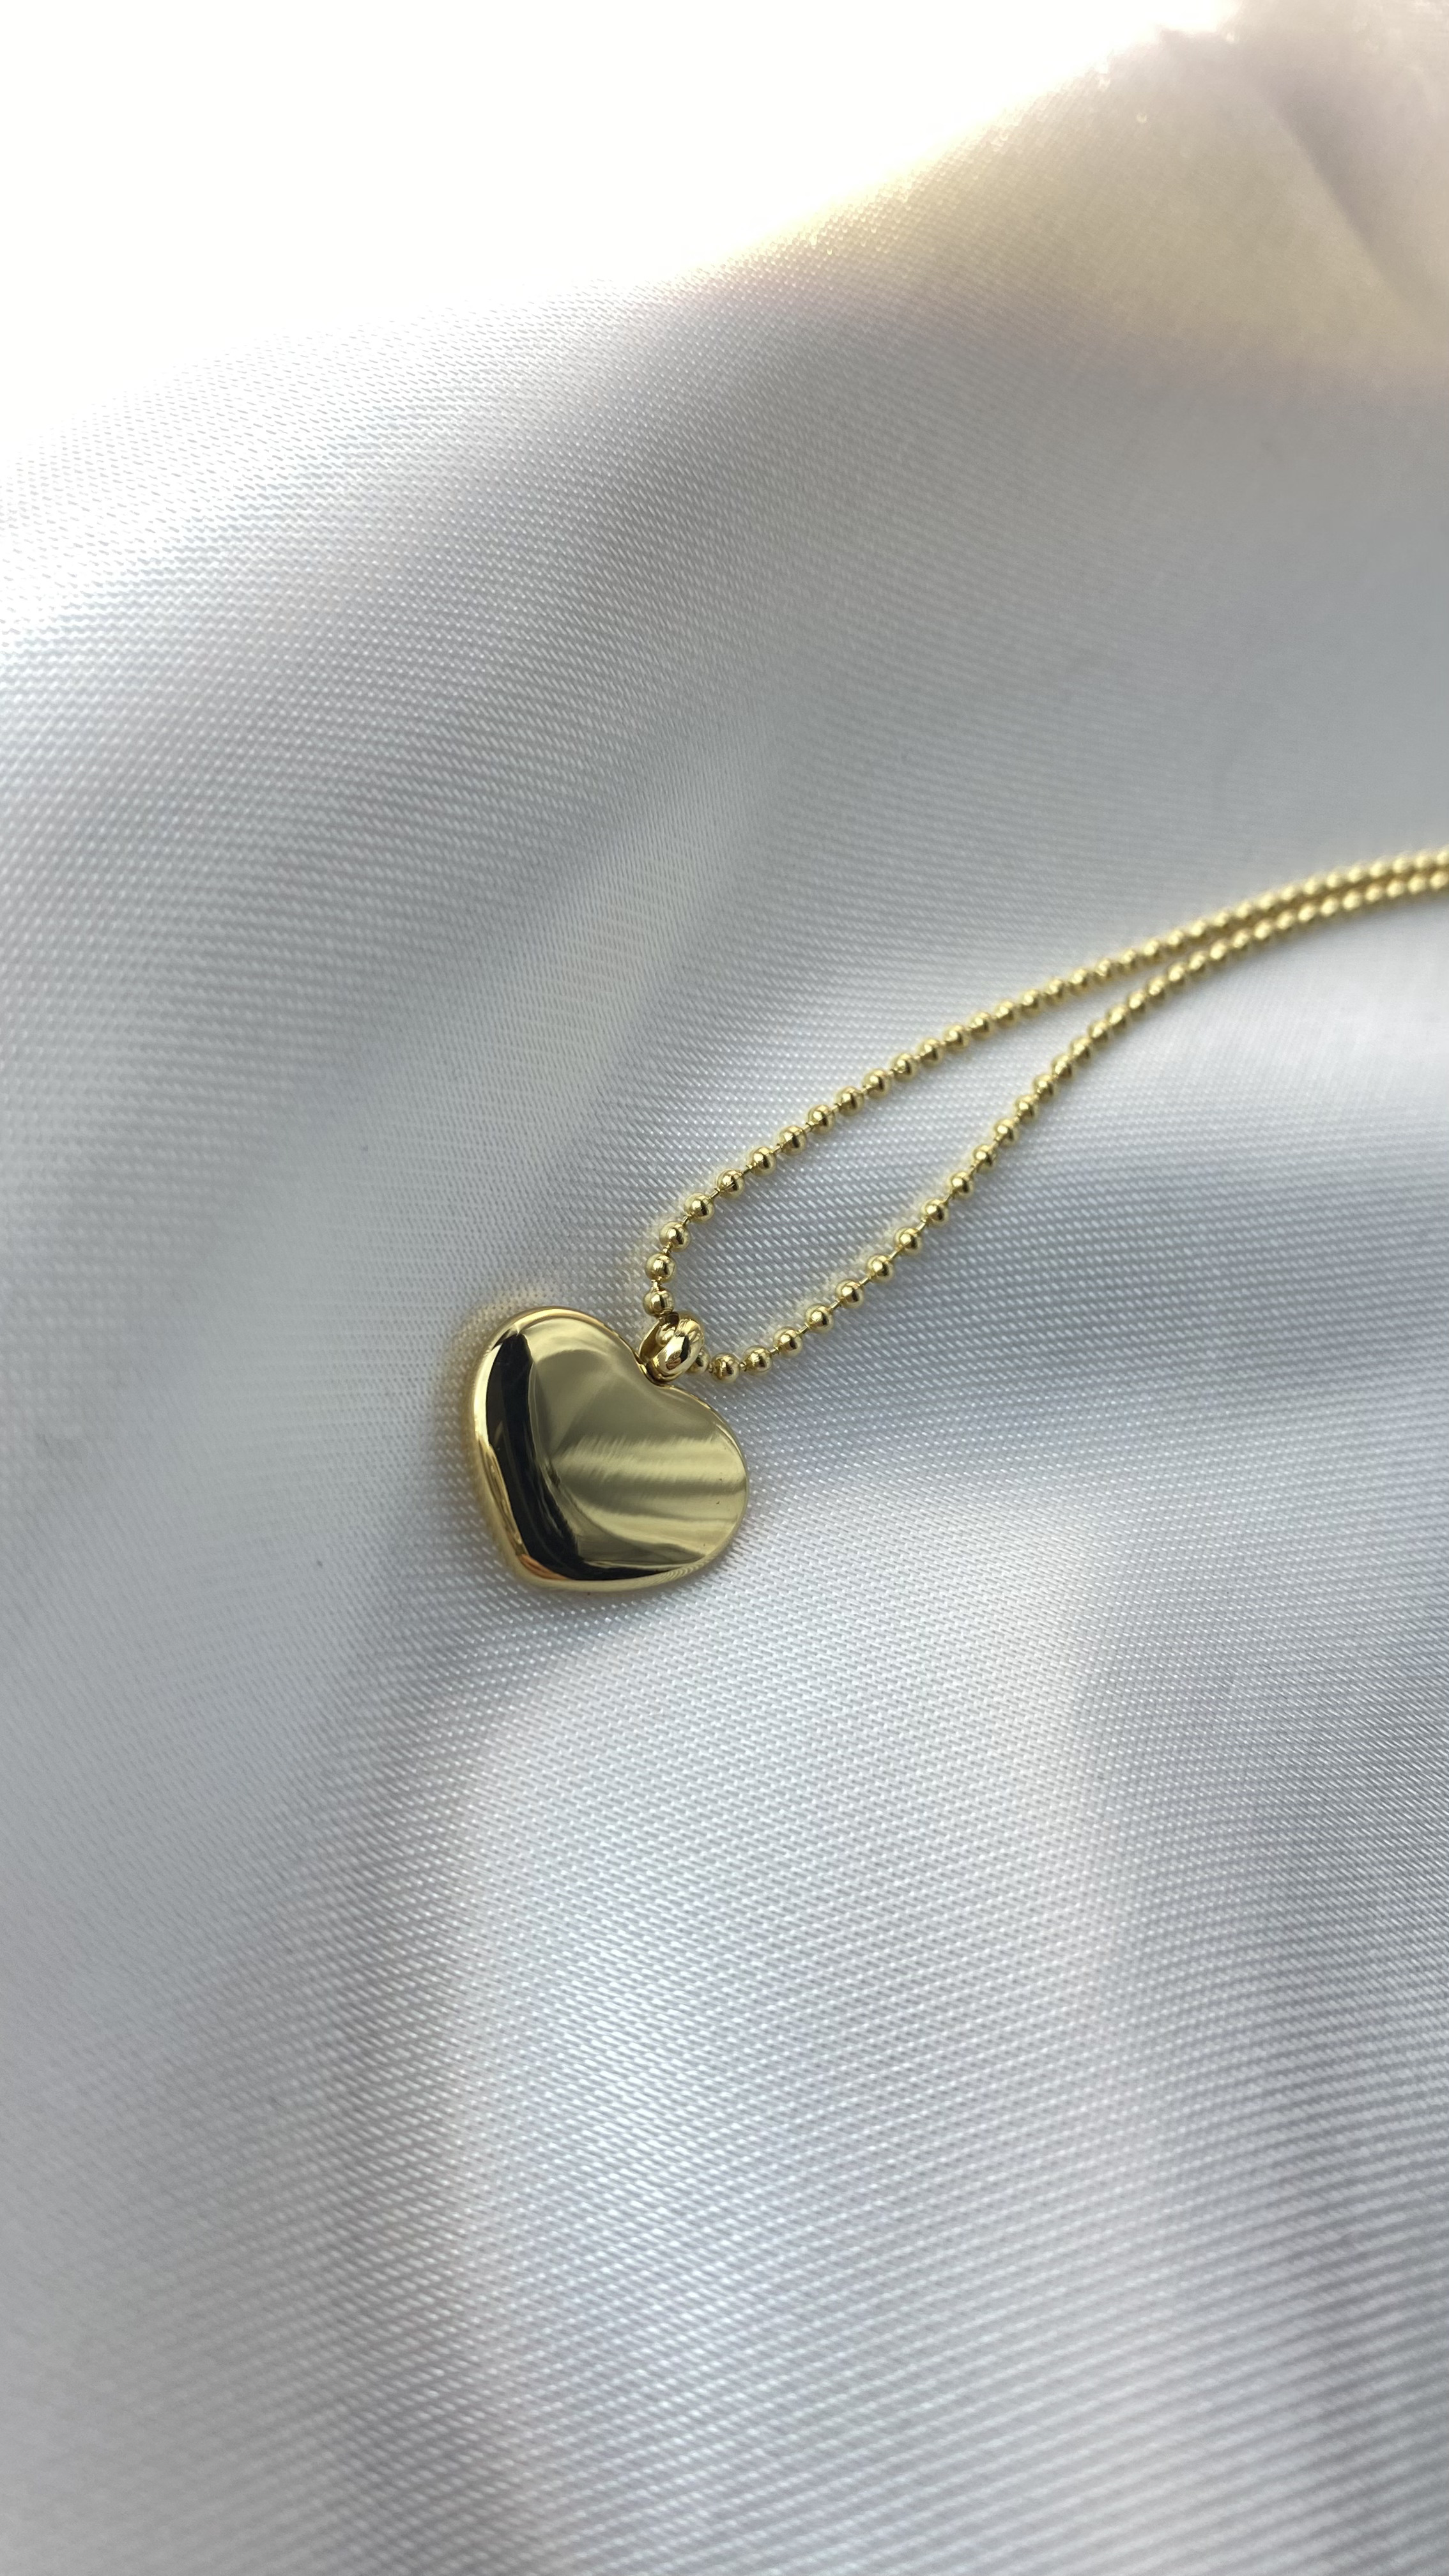 Heart necklace 18k gold plated, Cute necklace